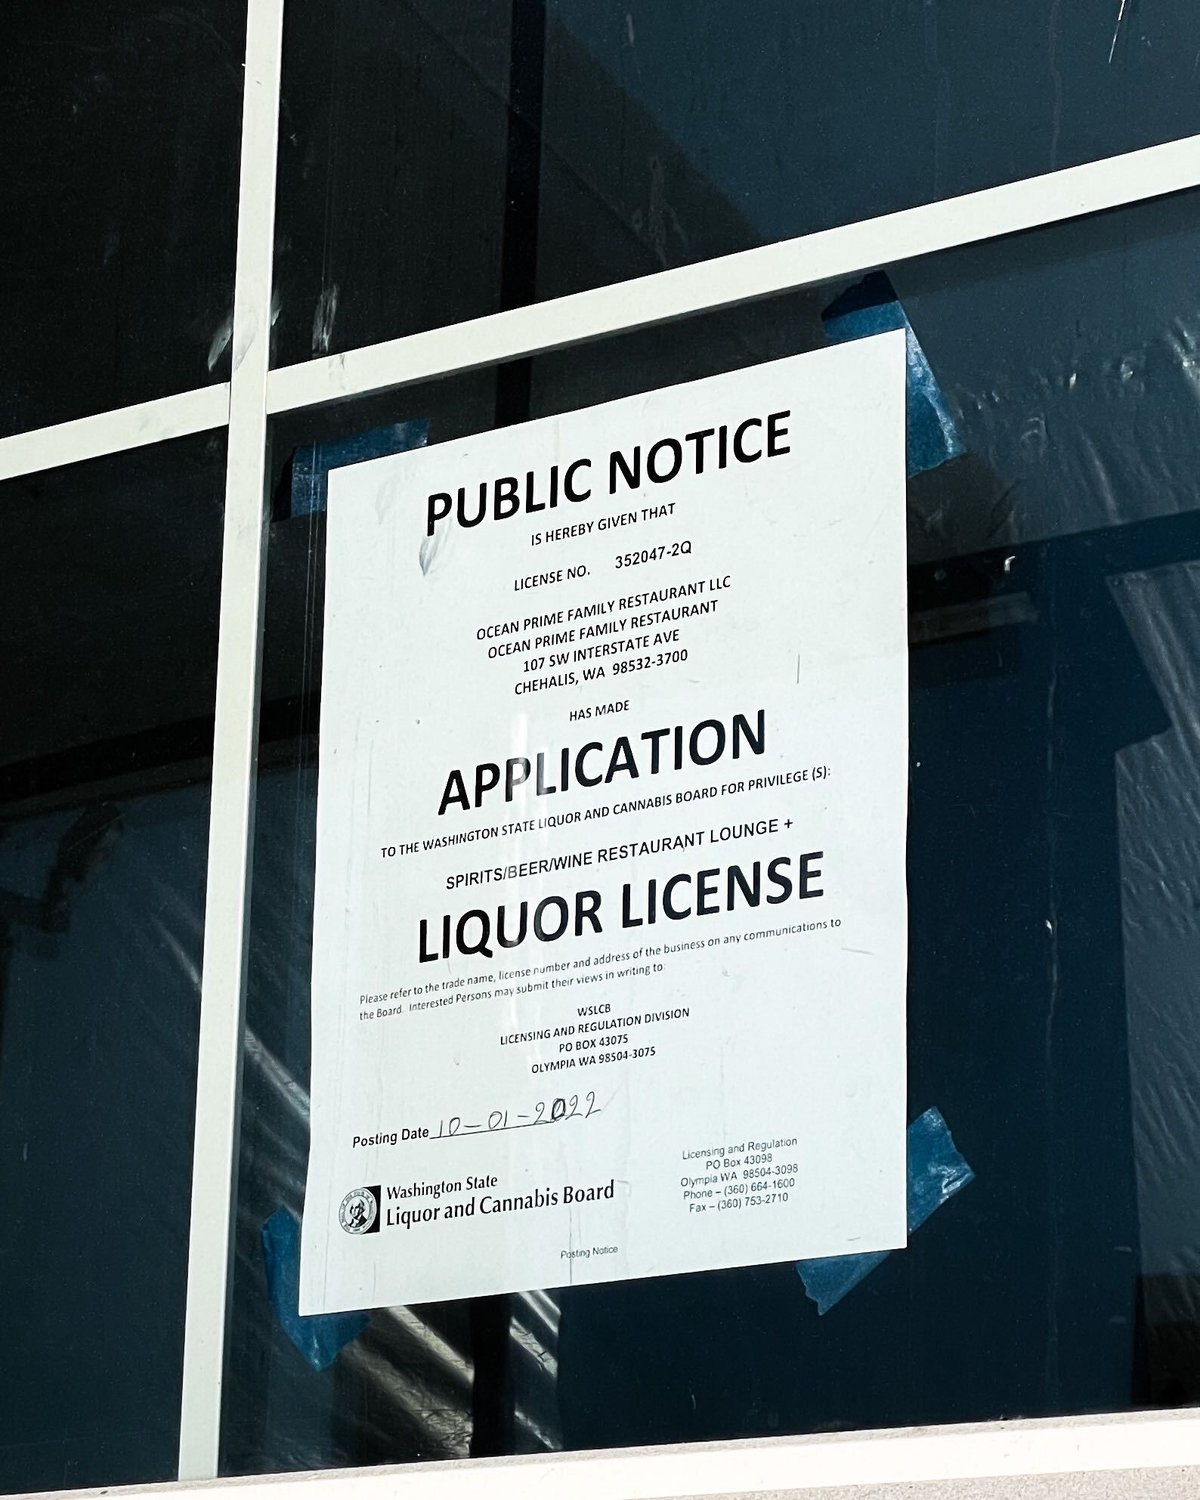 An application for a liquor license was made by Ocean Prime Family Restaurant at the former Kit Carson location.